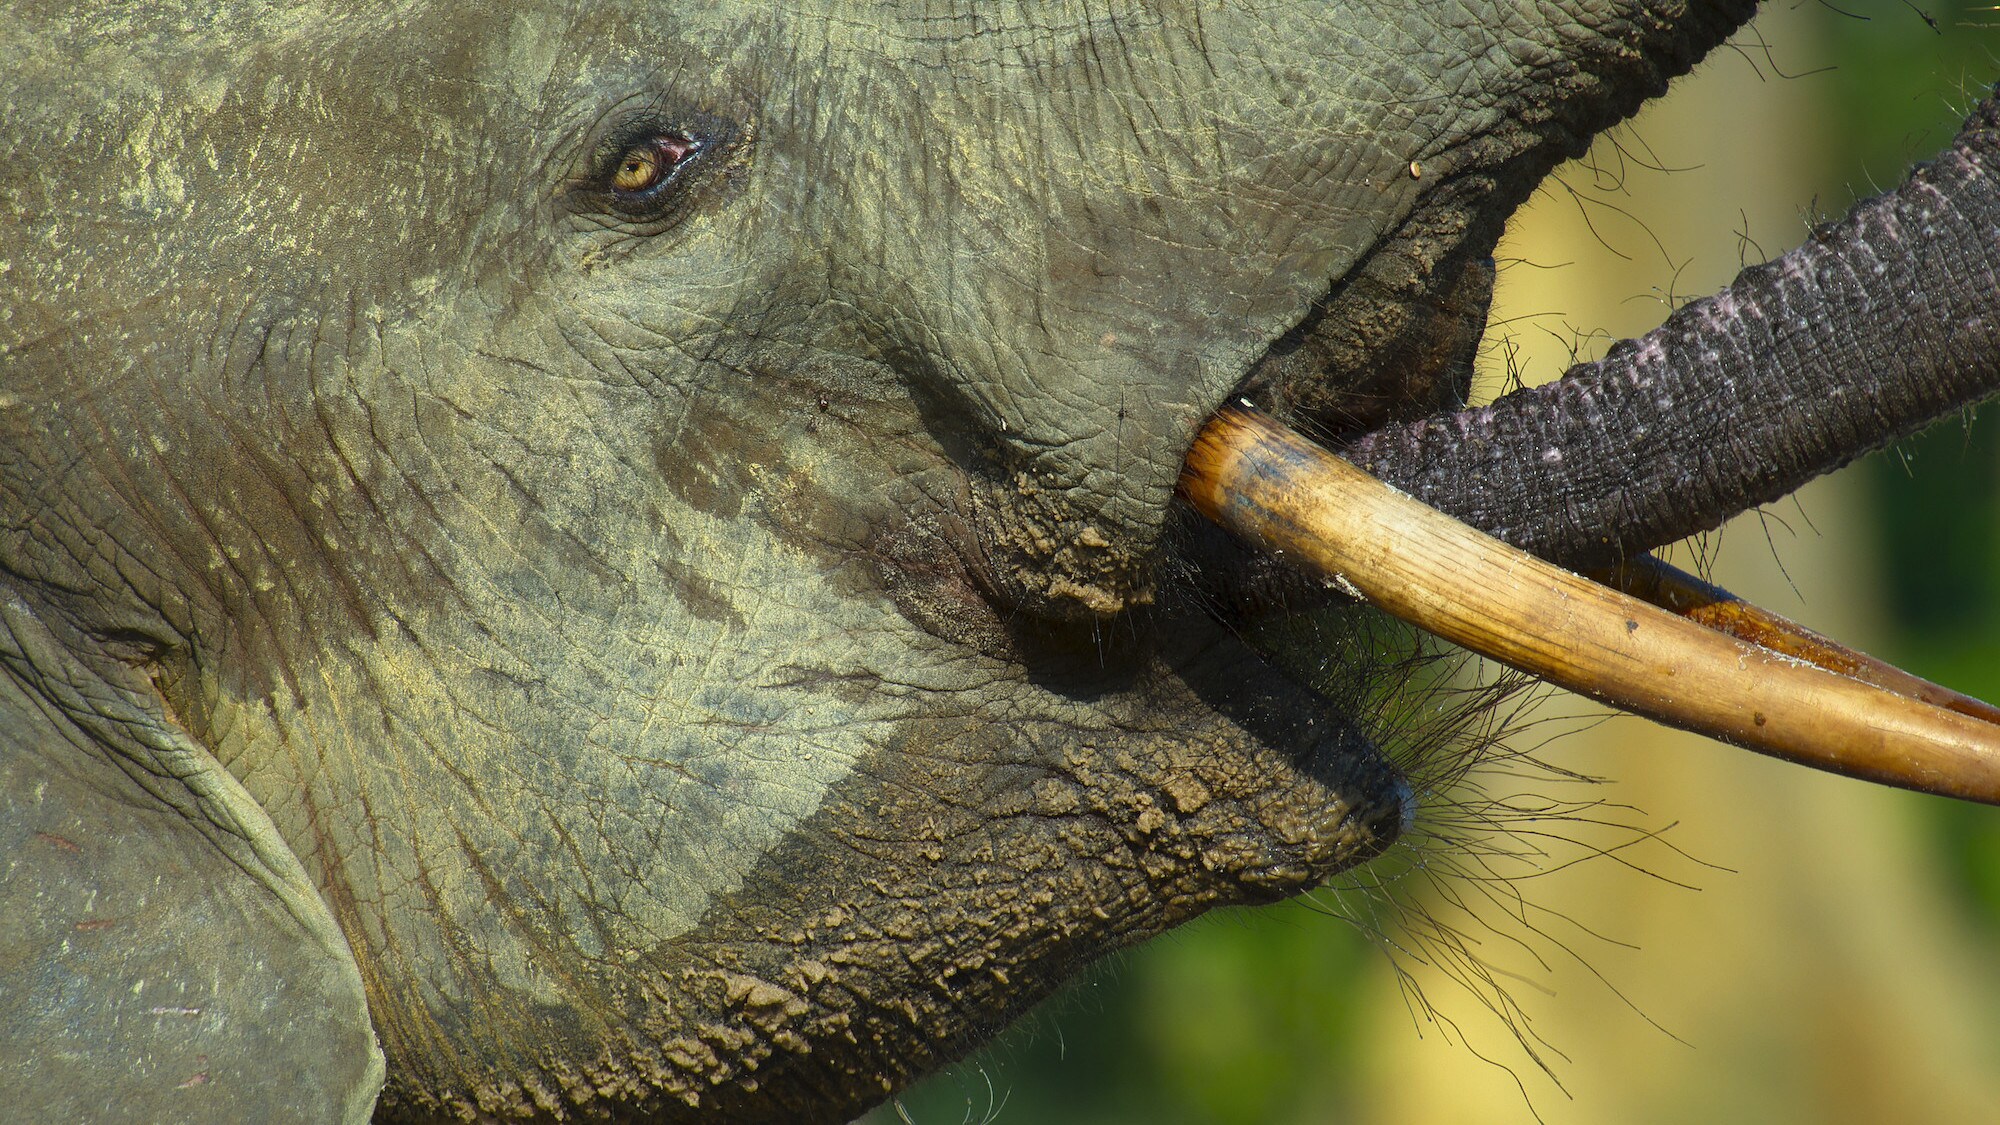 Close shot of the side of an elephants face with tusk. (National Geographic for Disney+/Bertie Gregory)